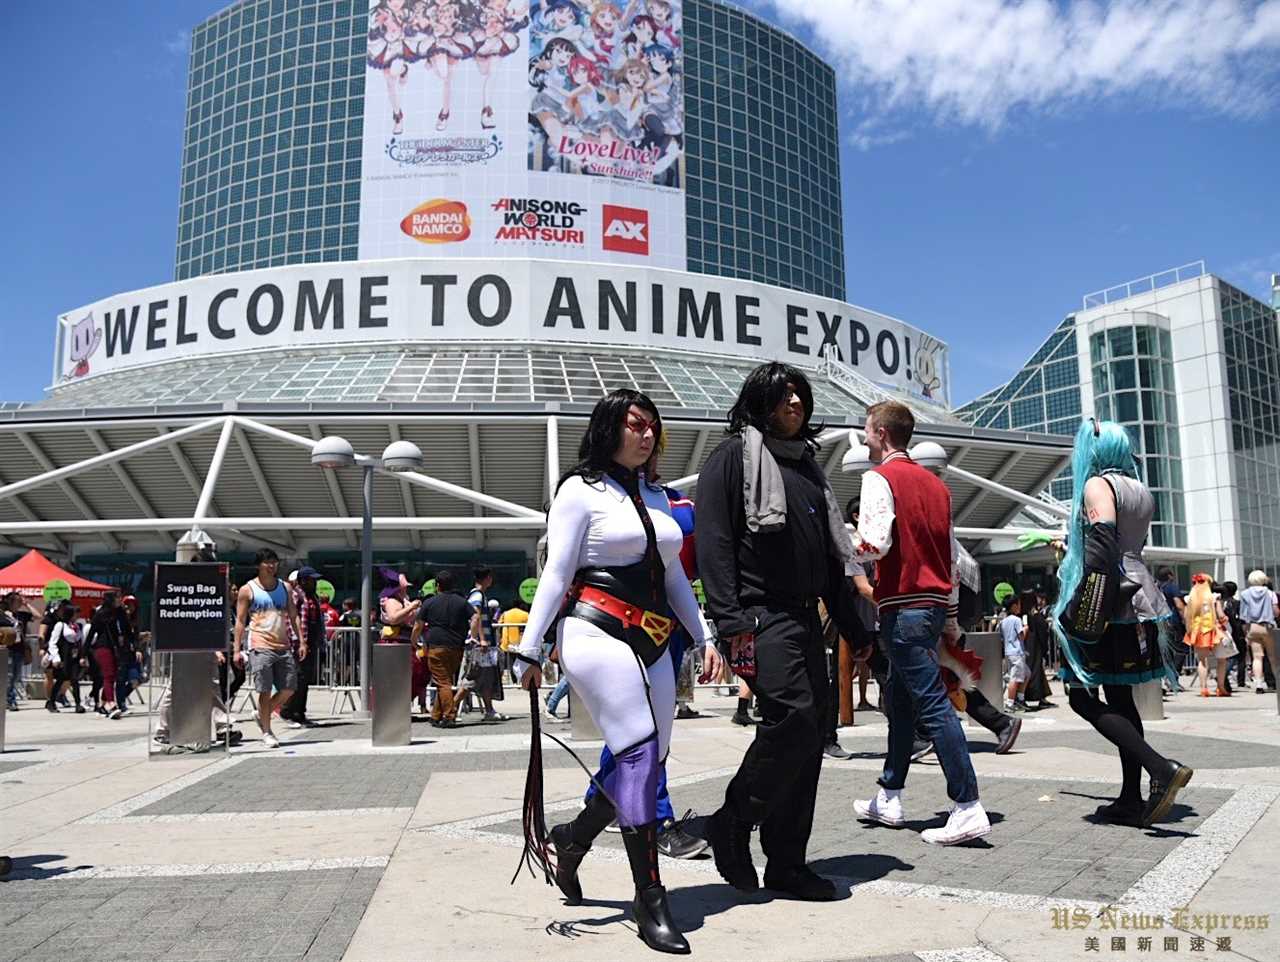 Anime Expo 2018 Returns to L.A. - US News Express